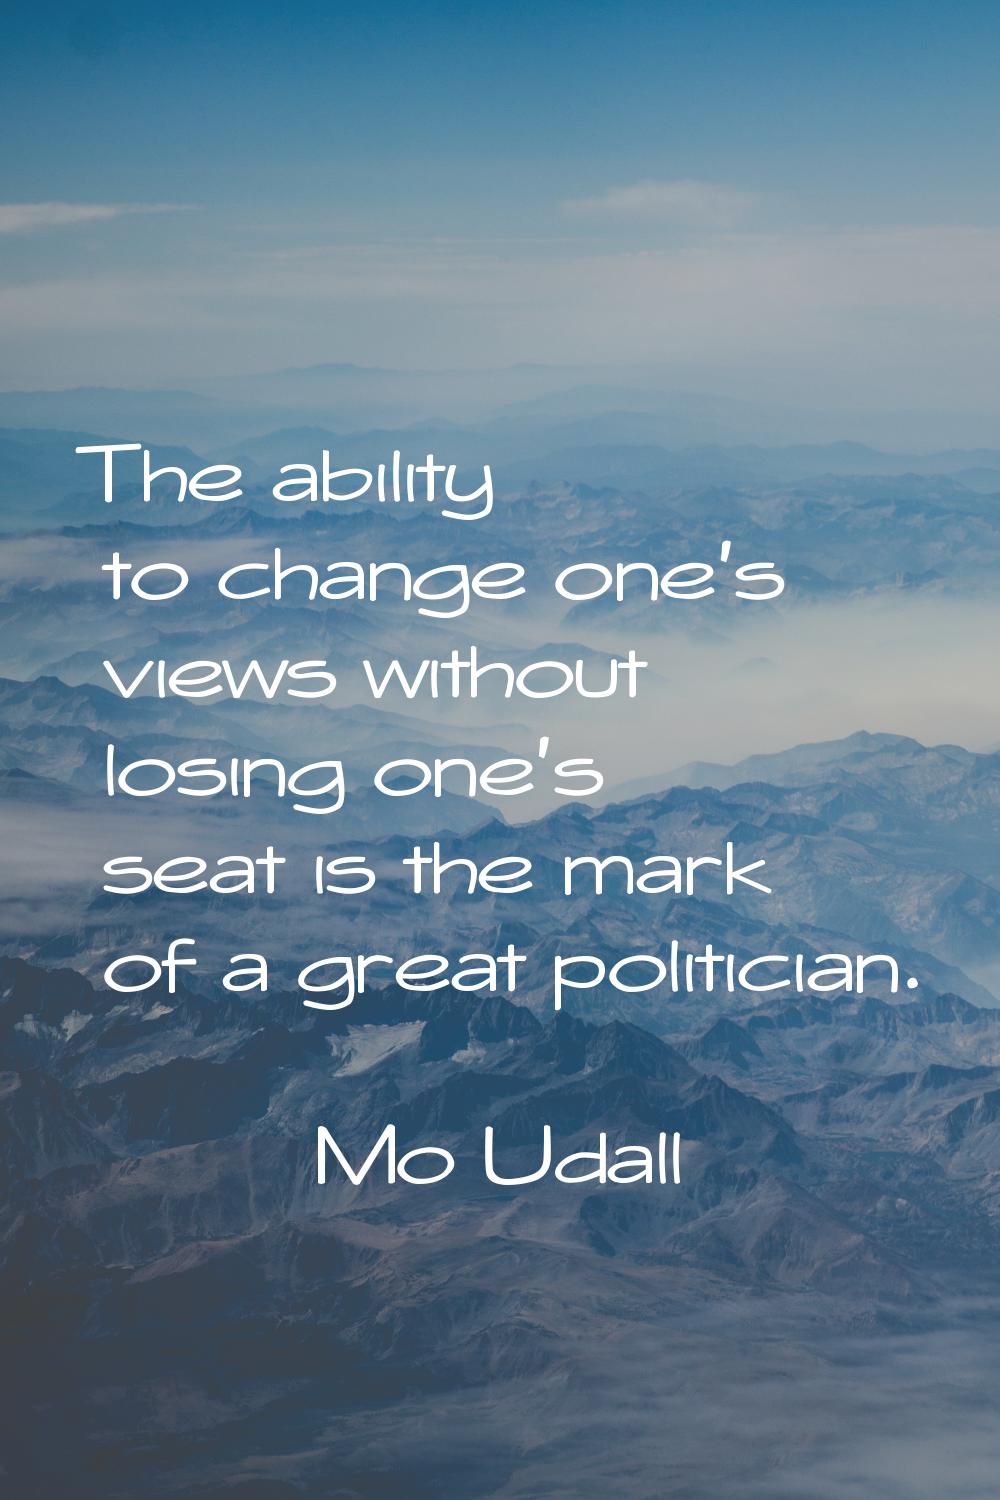 The ability to change one's views without losing one's seat is the mark of a great politician.